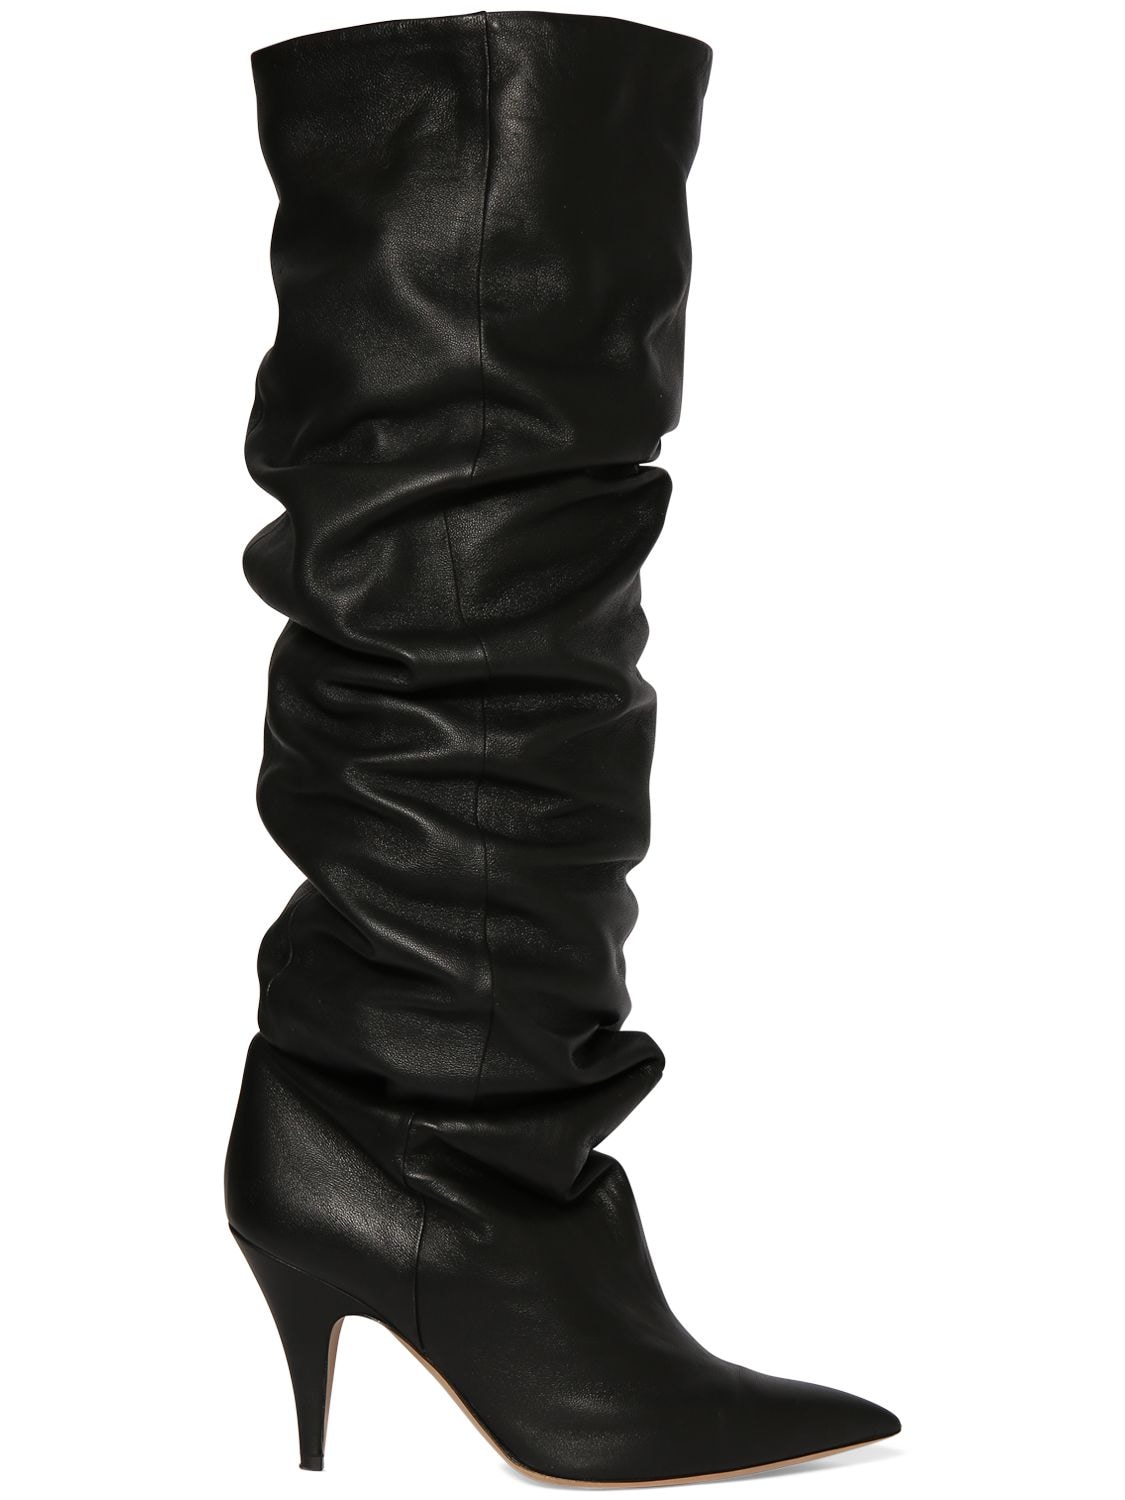 90mm River Knee High Leather Boots